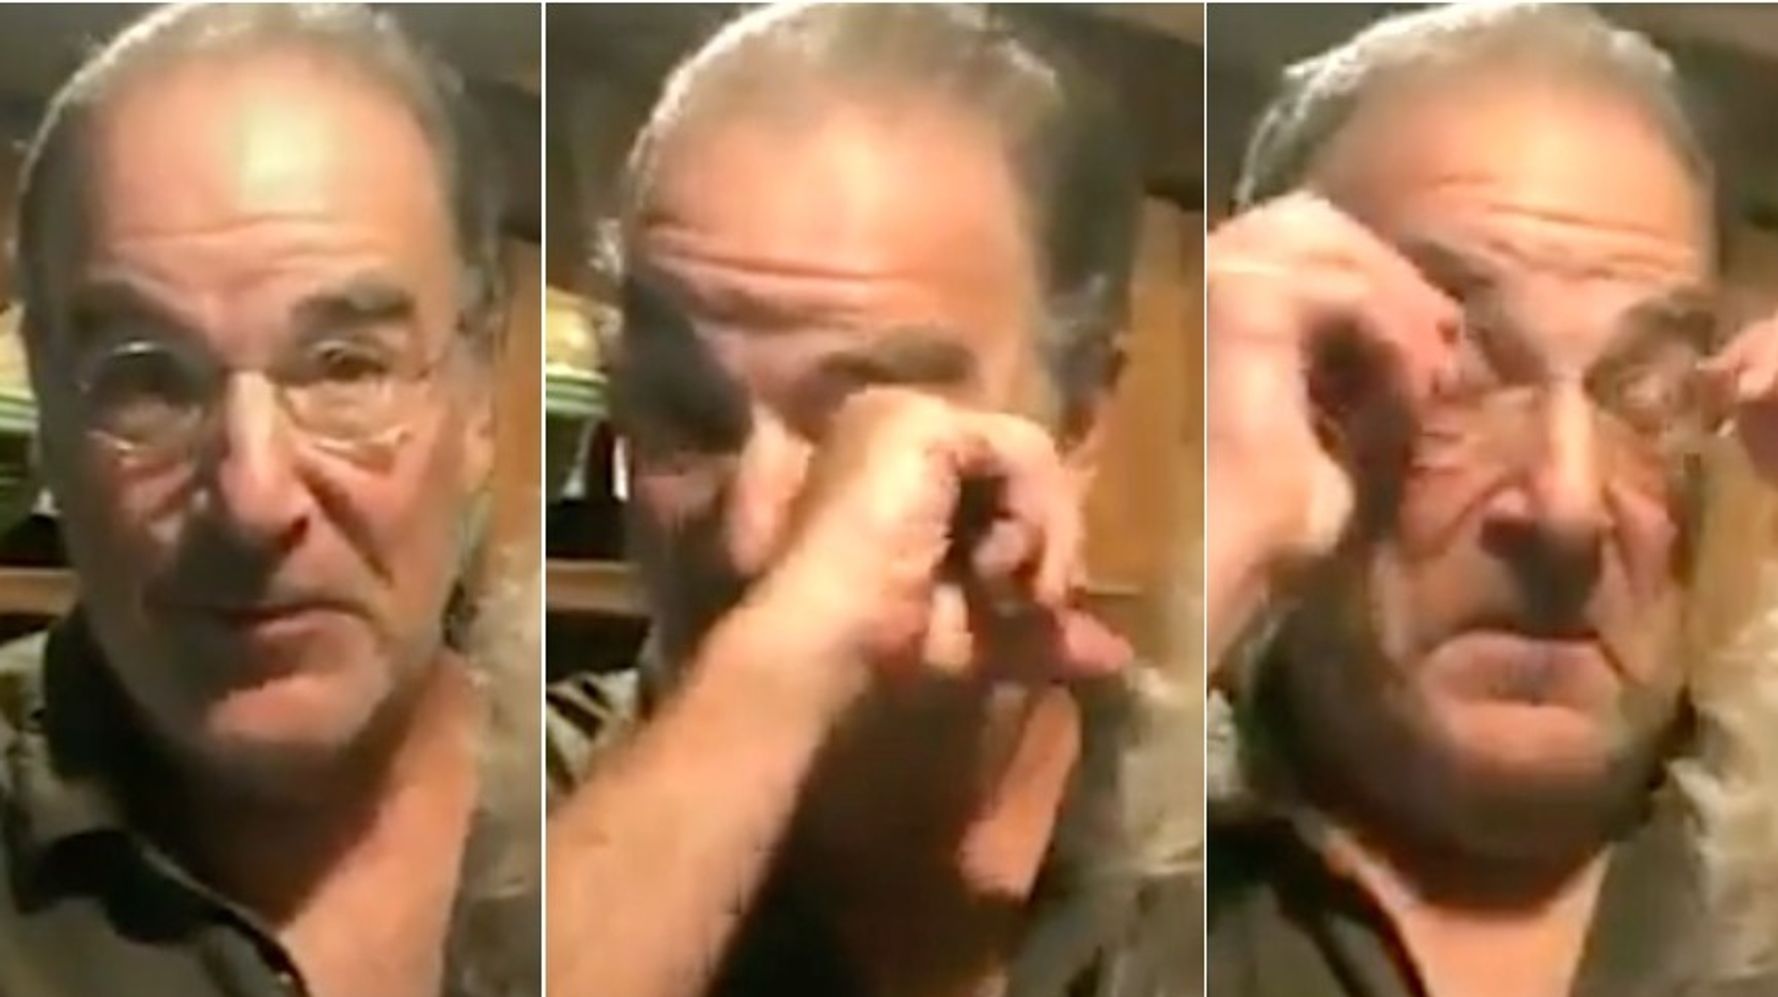 Tearful Mandy Patinkin Shares Emotional ‘Princess Bride’ Story With Grieving Fan